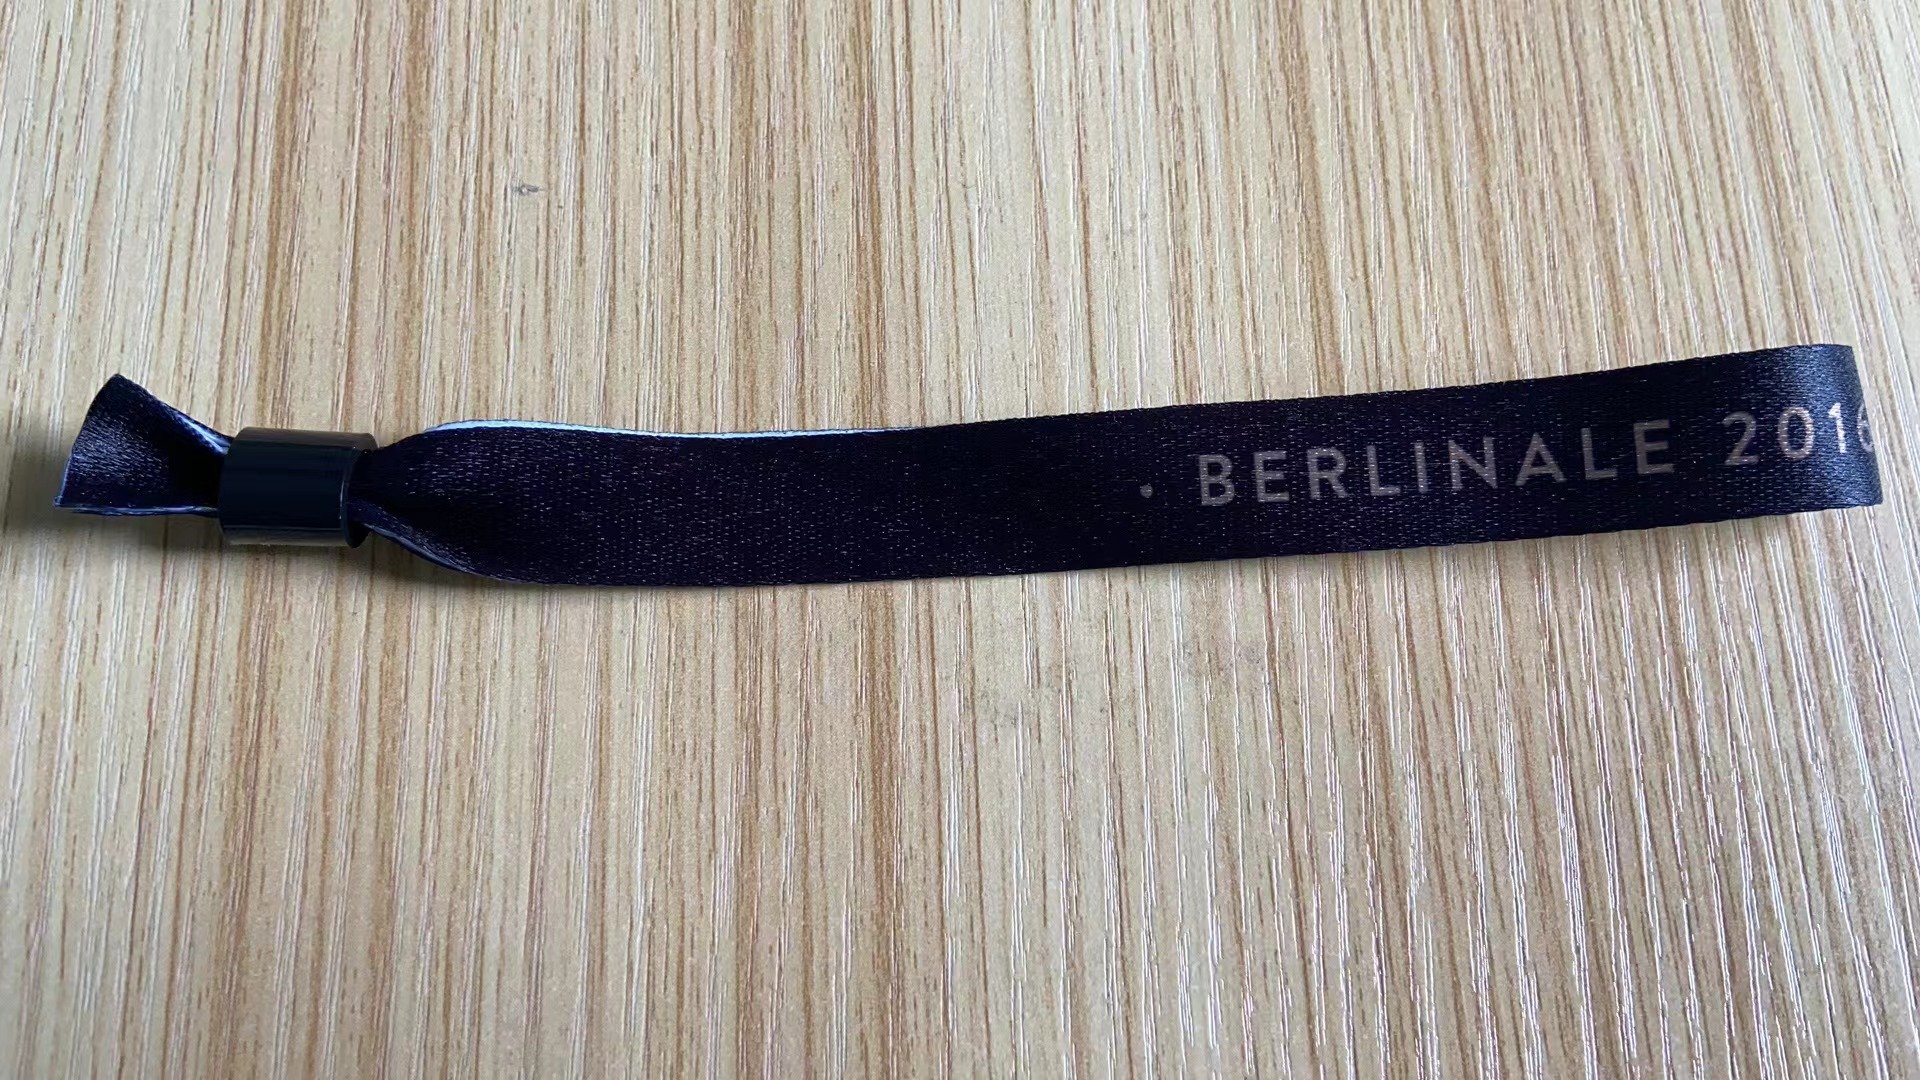 RFID Fabric Wristband used for Music Festival or Even